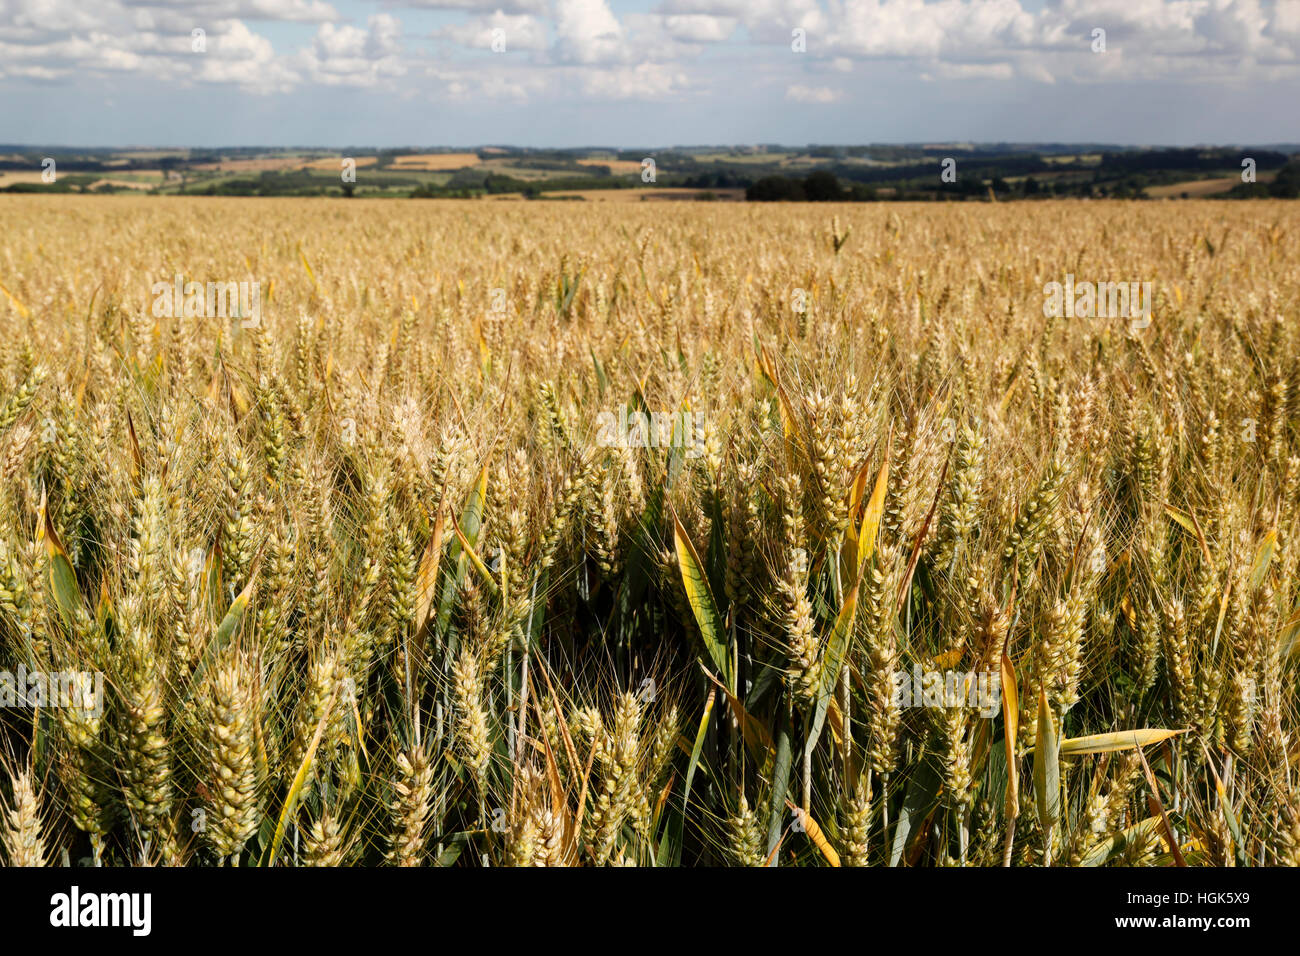 Triticale (hybrid of wheat and rye) ripening in field, Gloucestershire, England, United Kingdom, Europe Stock Photo